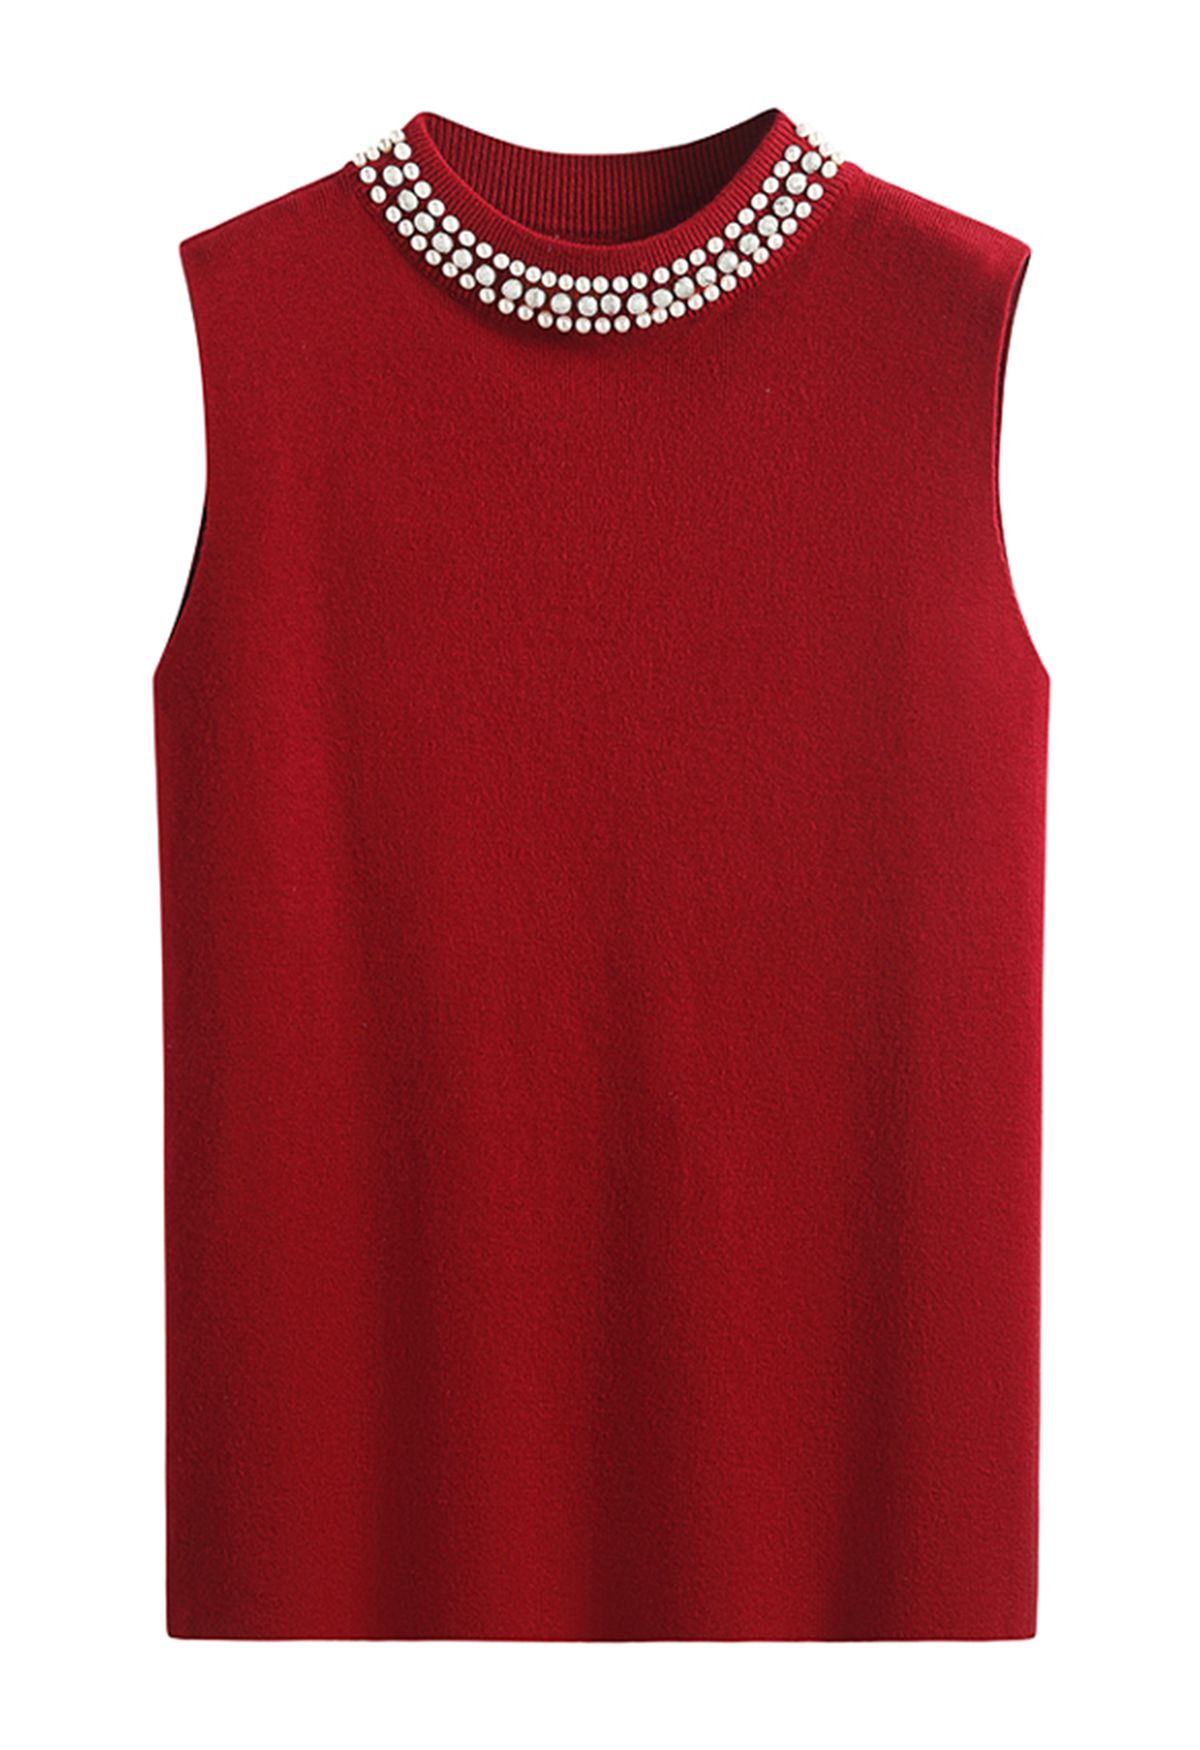 Pearl Embellished Mock Neck Sleeveless Knit Top in Burgundy